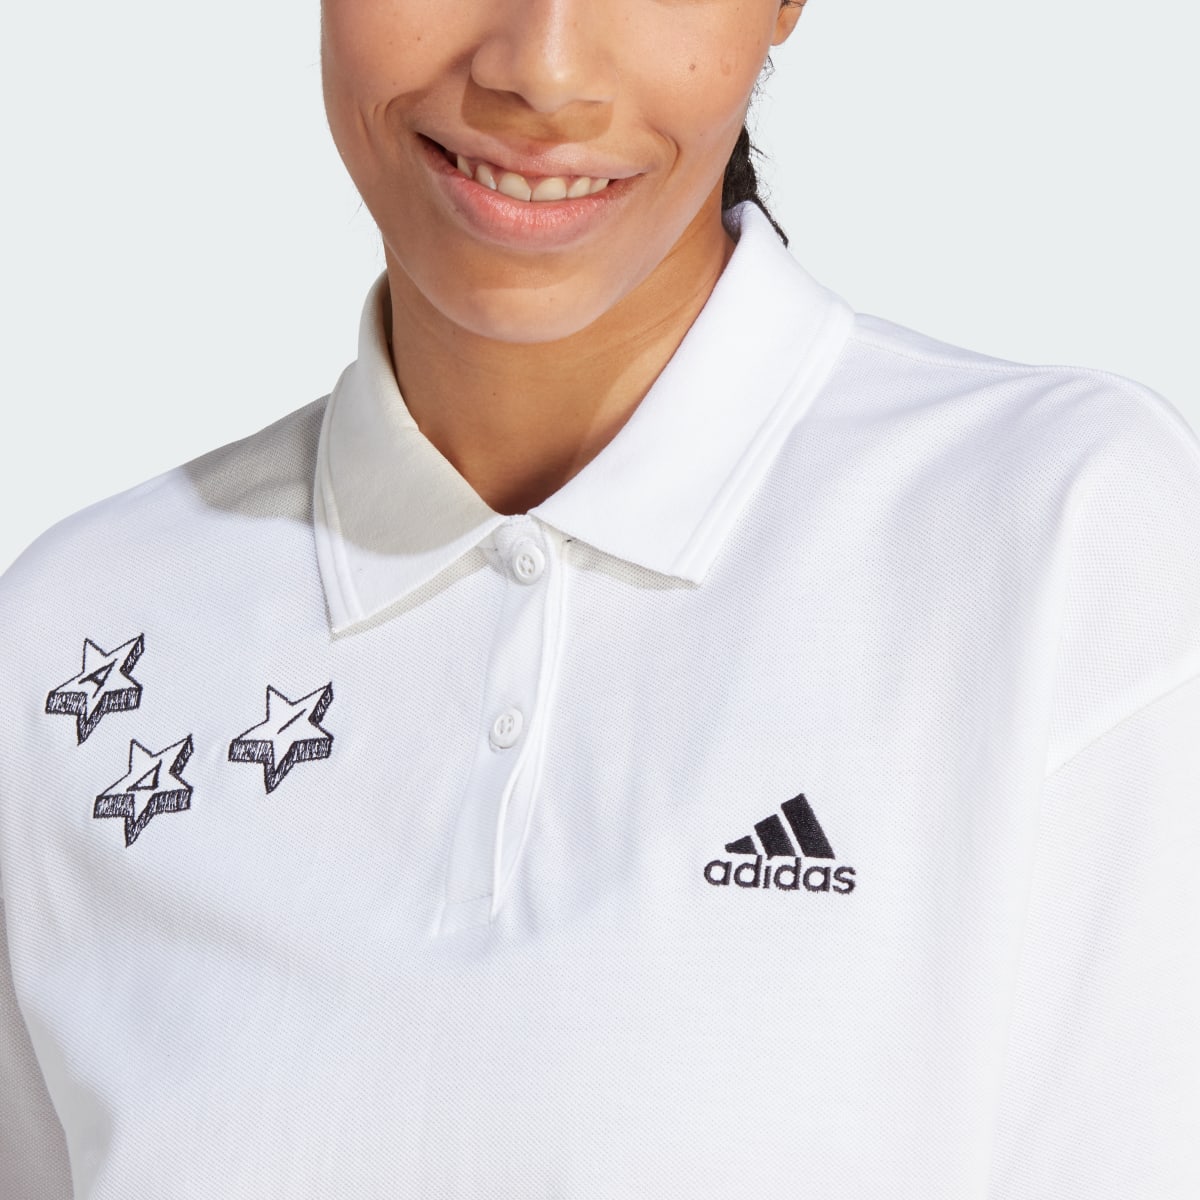 Adidas Polo Scribble Embroidery. 6